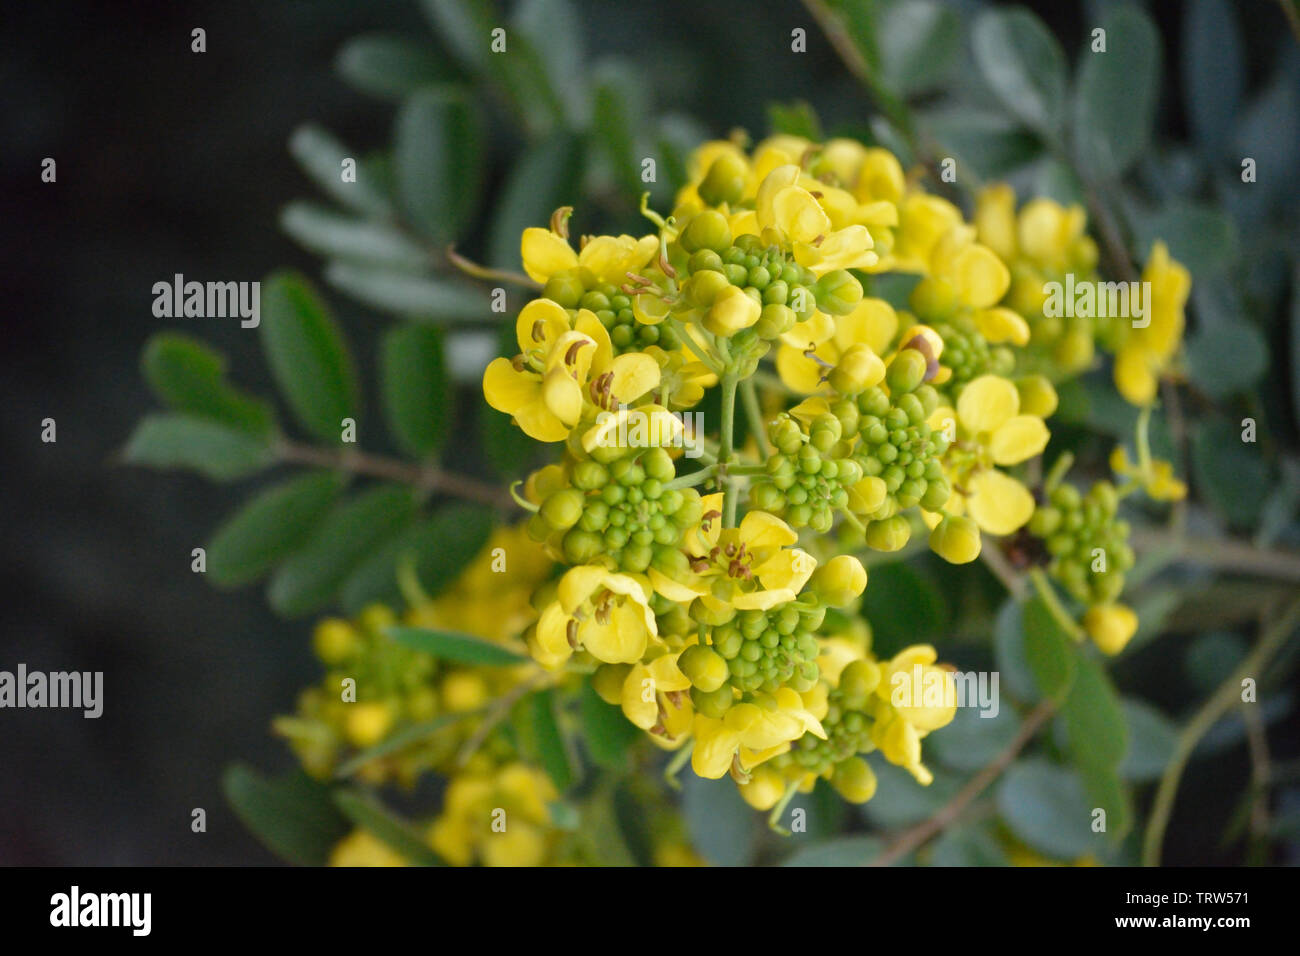 Yellow blossoms on a green branch with tiny green flower buds in between the yellow flowers Stock Photo